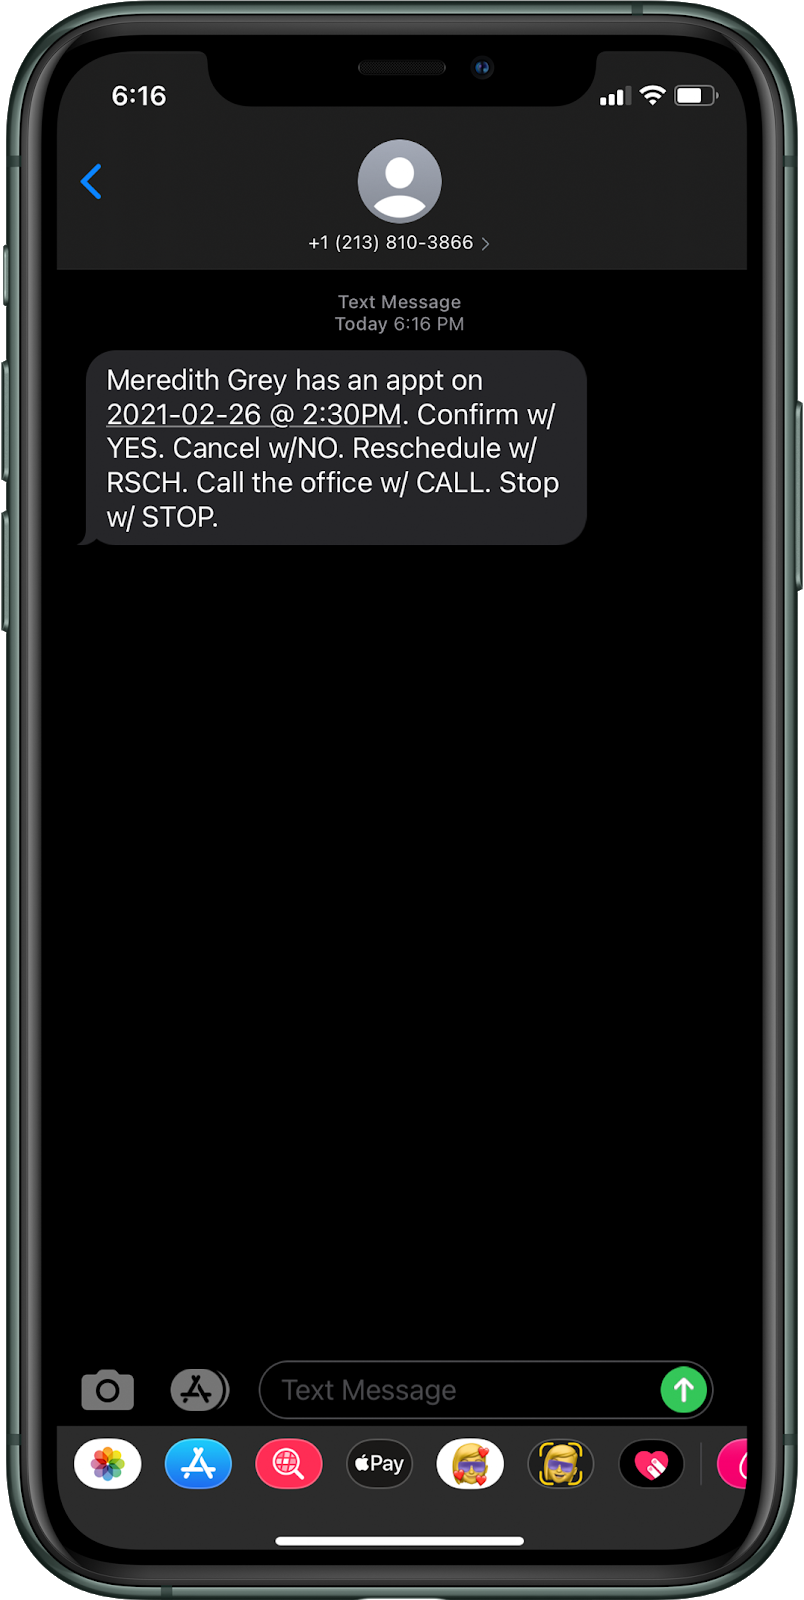 An image of an iPhone with the first message that you will receive from the system when you make a POST request.